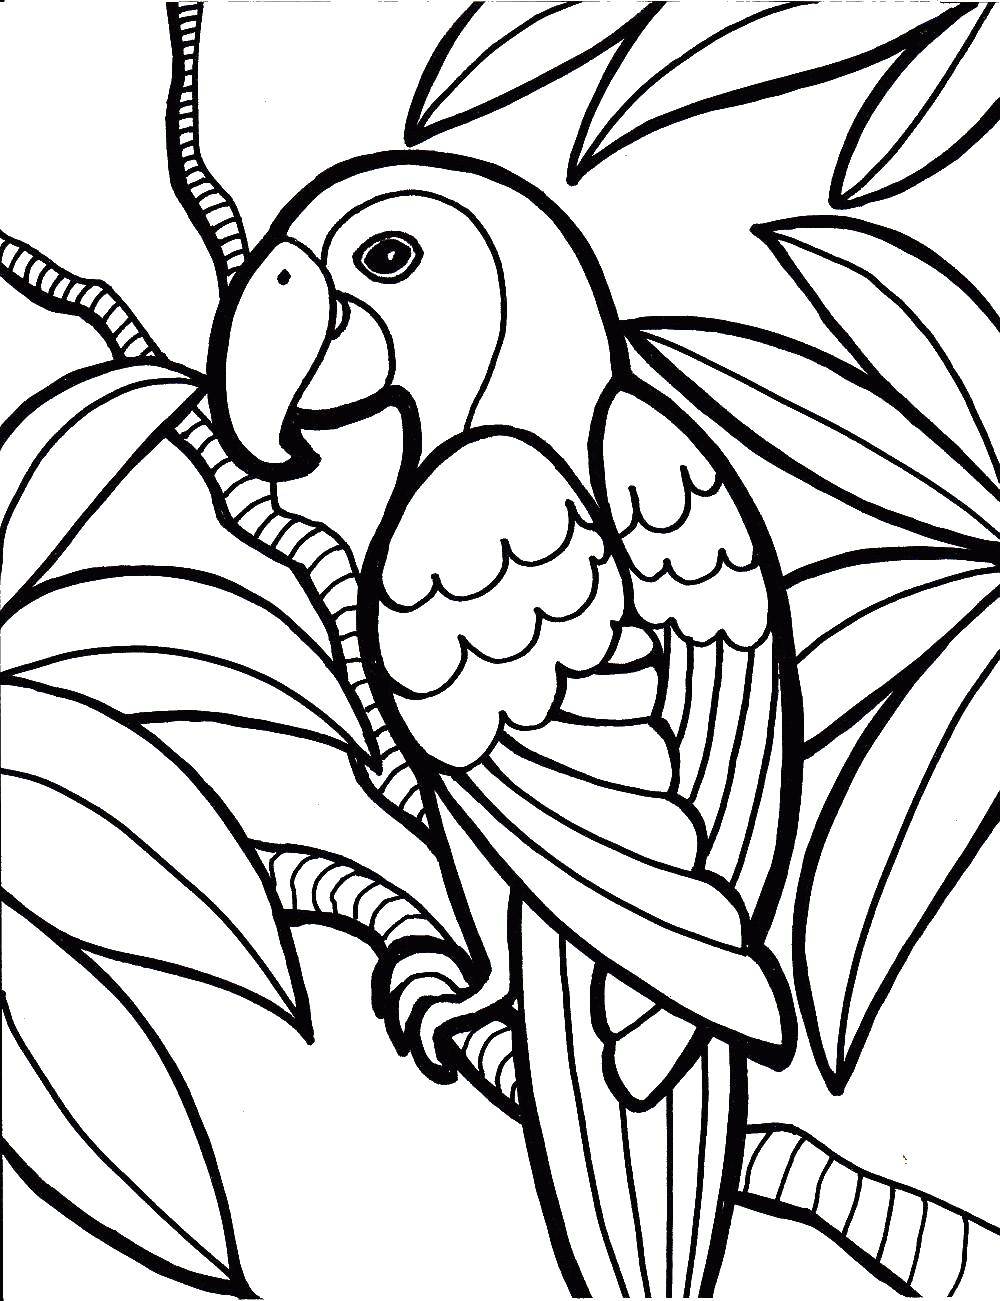 Coloring Parrot in the tropics. Category birds. Tags:  Birds, parrot.